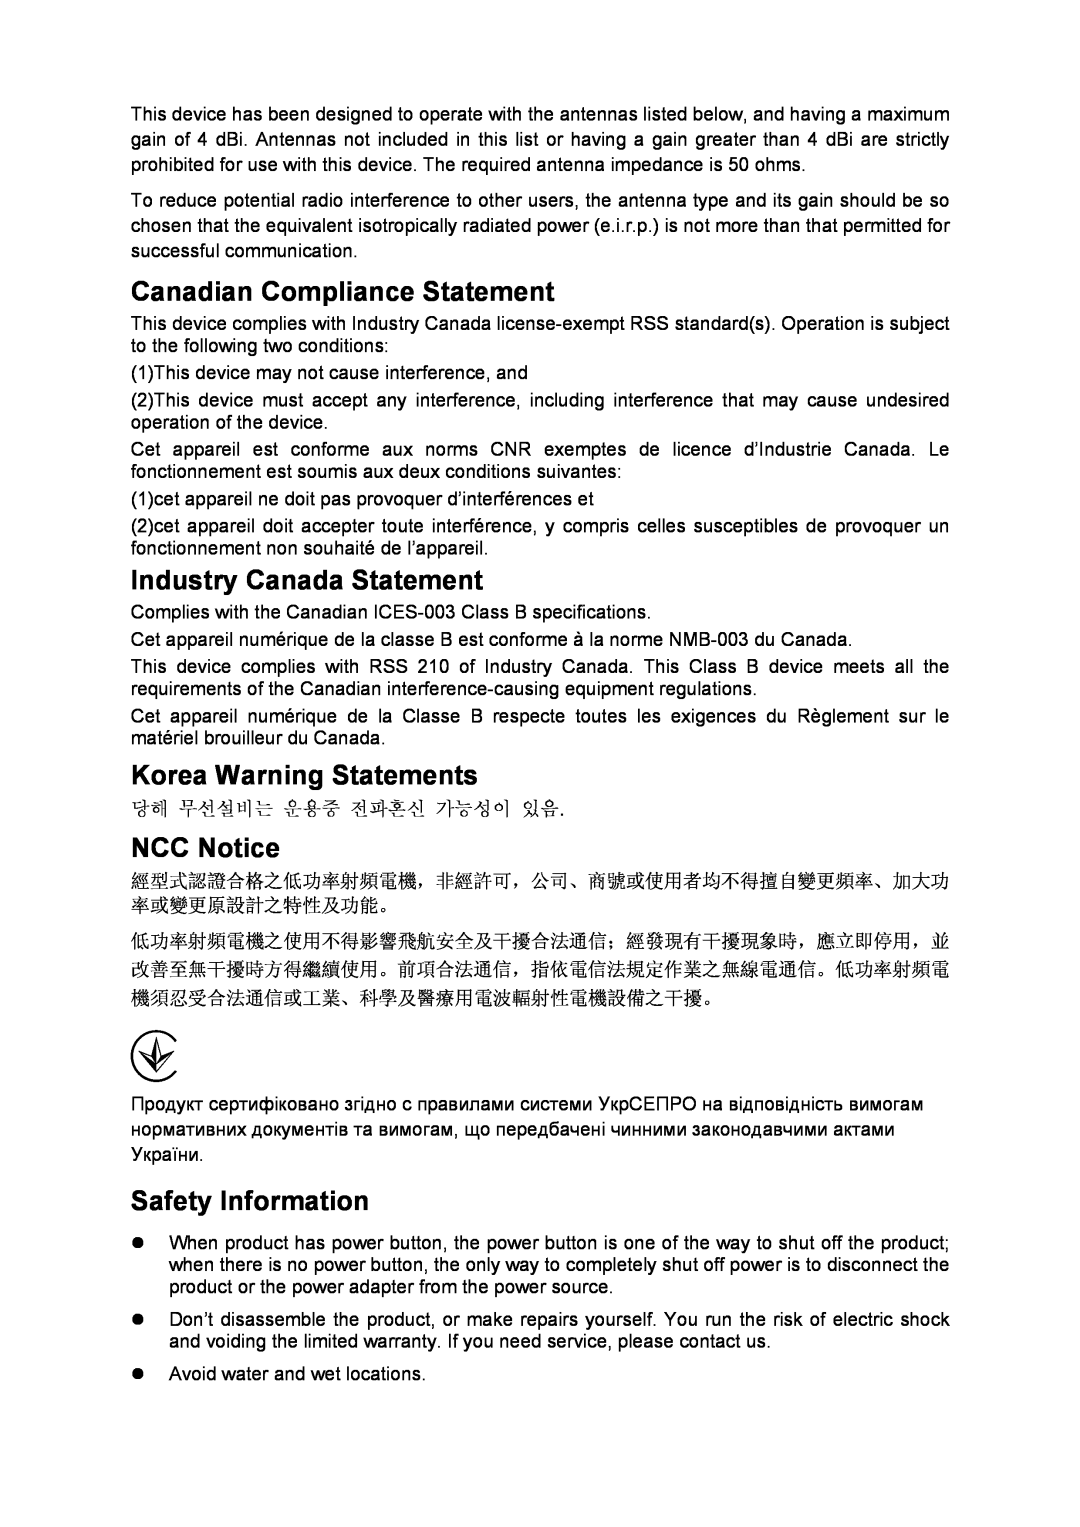 TP-Link TL-WA730RE manual Canadian Compliance Statement, Industry Canada Statement, Korea Warning Statements, NCC Notice 